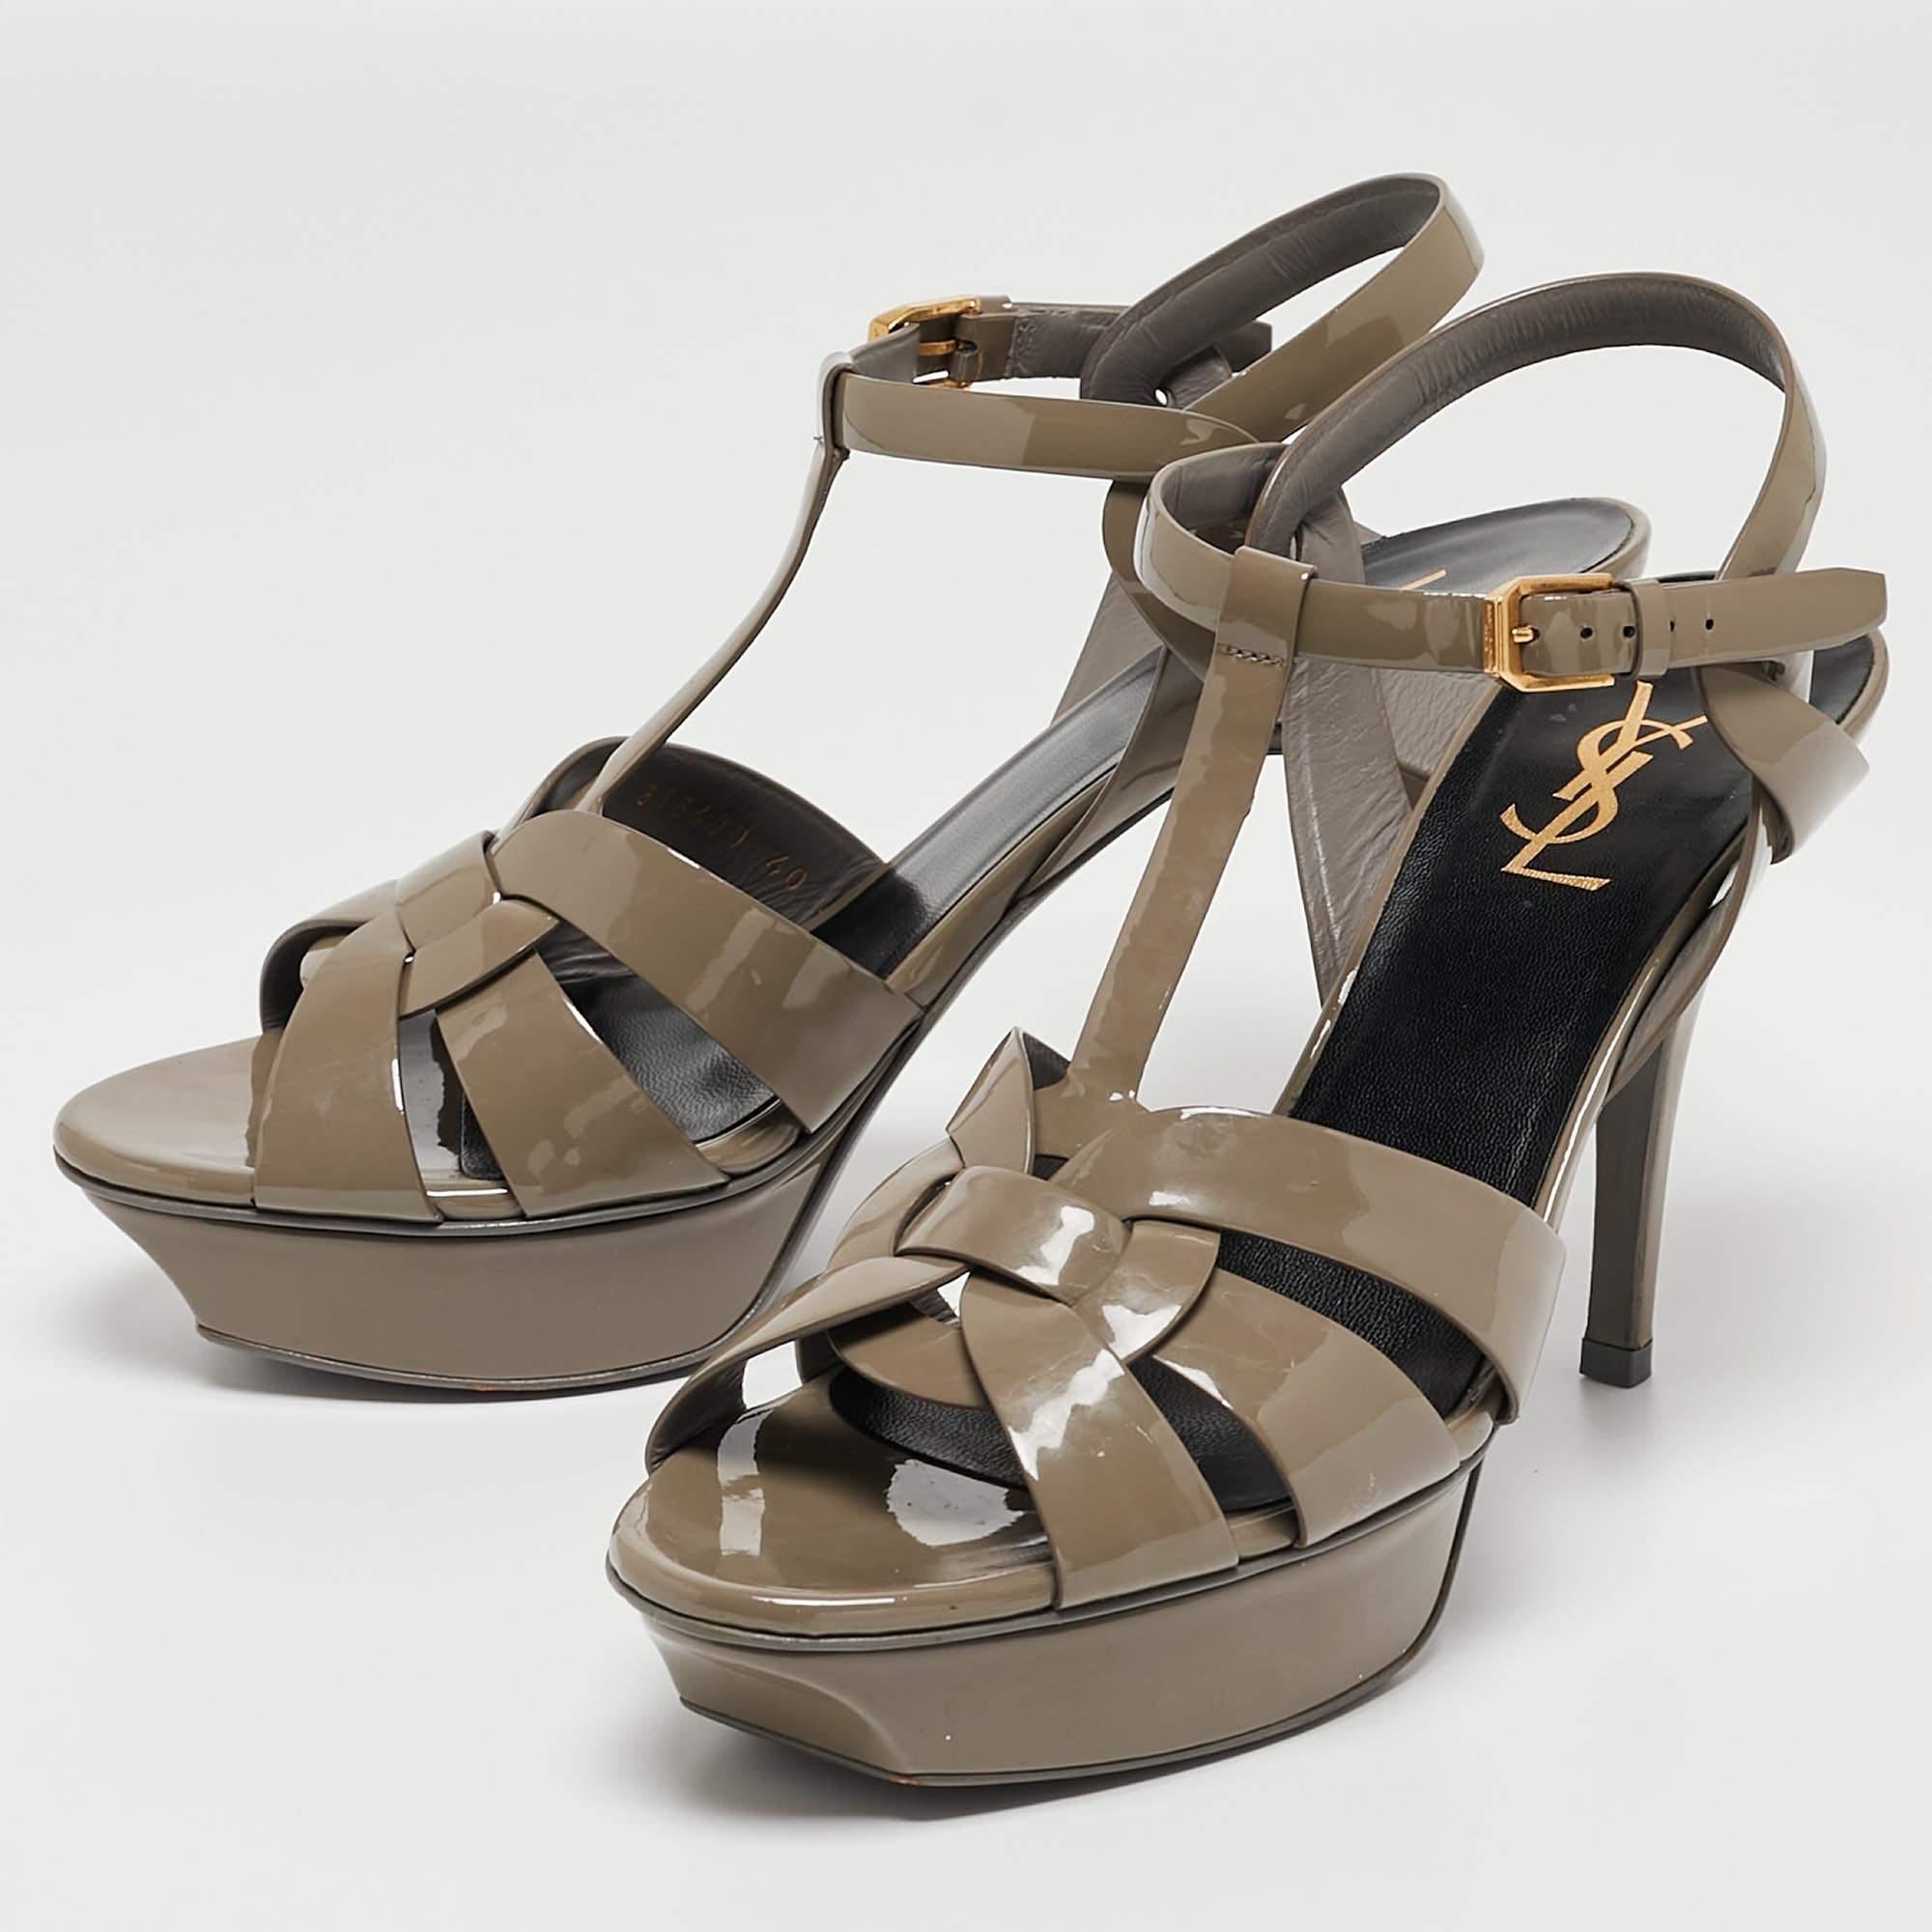 One of the most sought-after designs from Saint Laurent is their Tribute sandals. They are such a craze amongst fashionistas around the world, and it is time you own one yourself. These beauties are ideal for your spring-summer closet and are